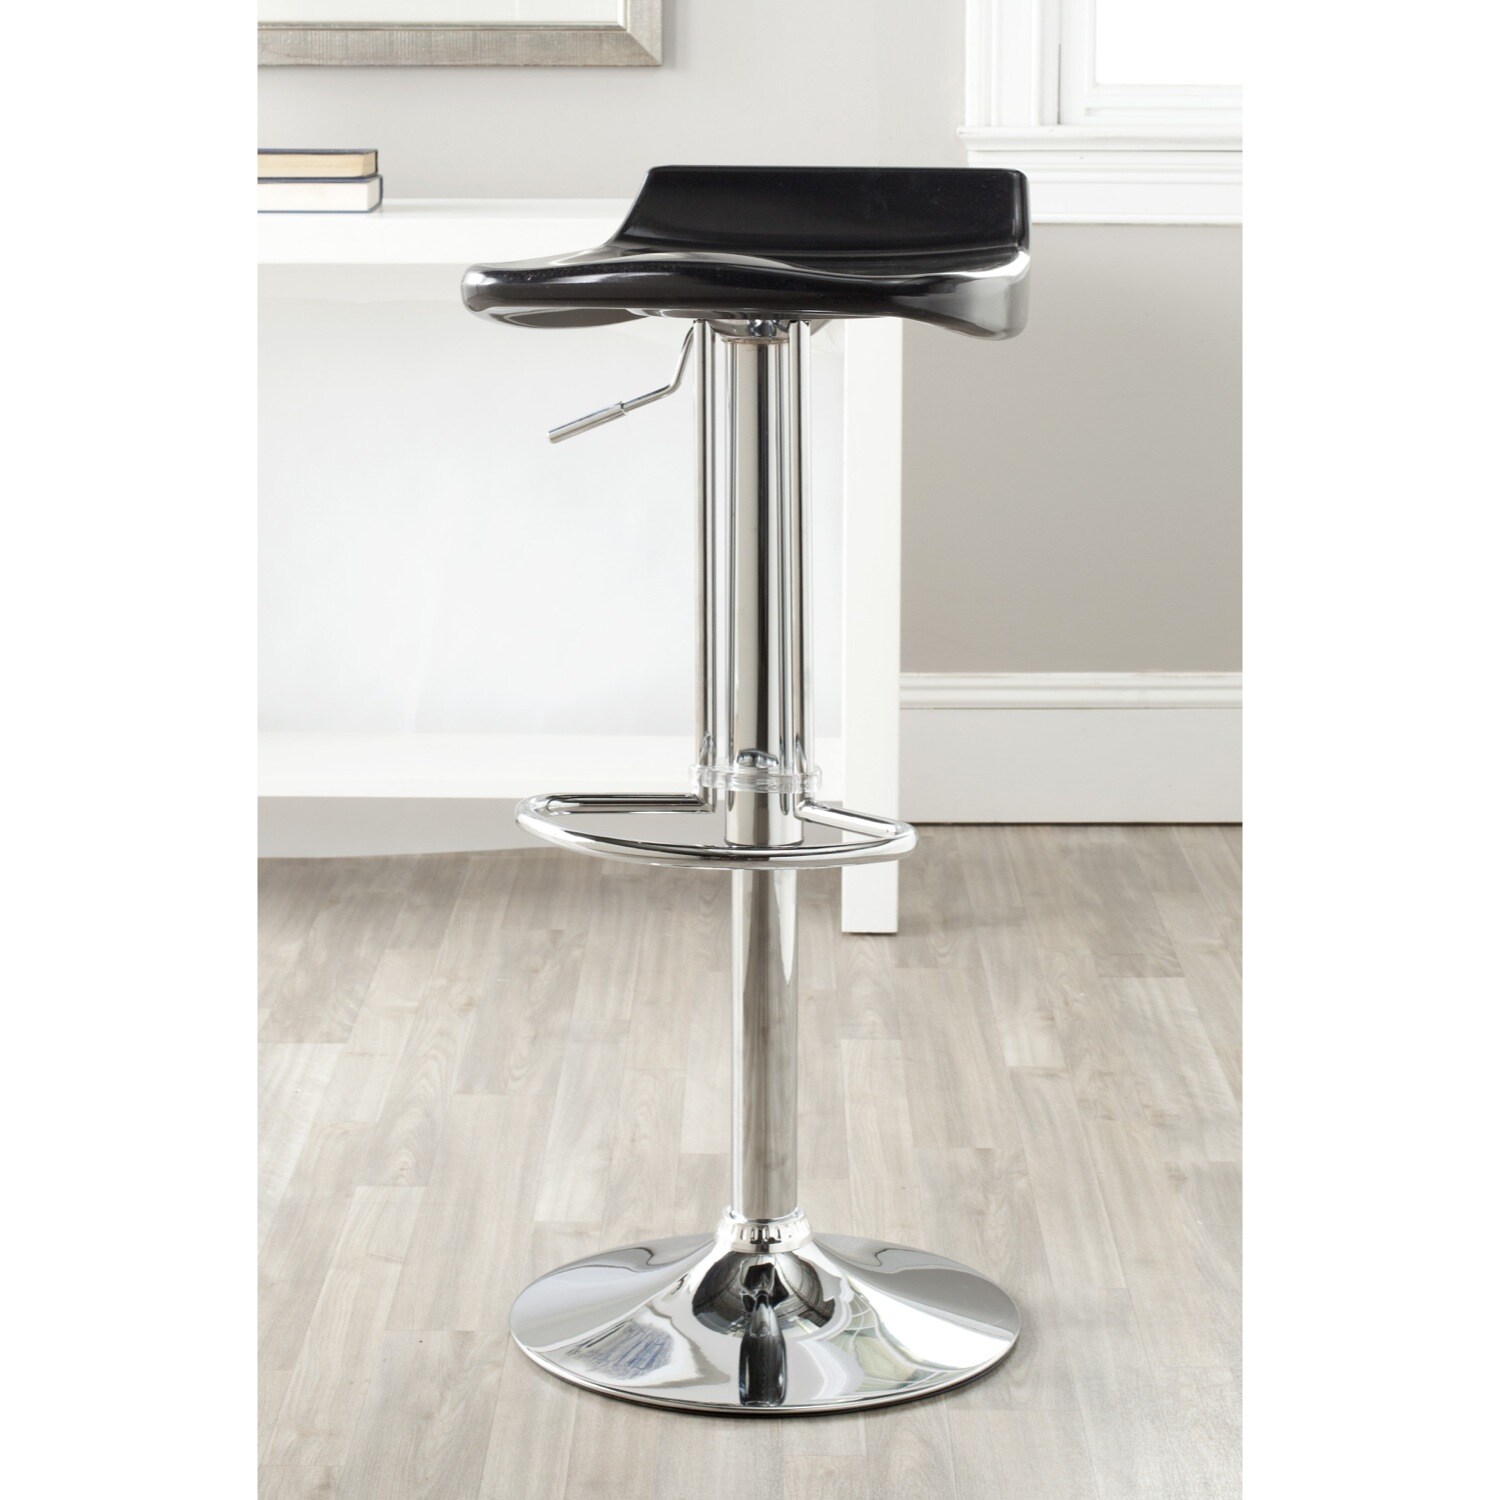 Safavieh Avish Black Adjustable Height Swivel Bar Stool (BlackMaterials ABS Plastic and Chrome SteelSeat dimensions 15.2 inches wide x inches deepSeat height 23.6 32.1 inchesDimensions 25.6 34.1 inches high x 15.2 inches wide x 16.3 inches deepThis pr